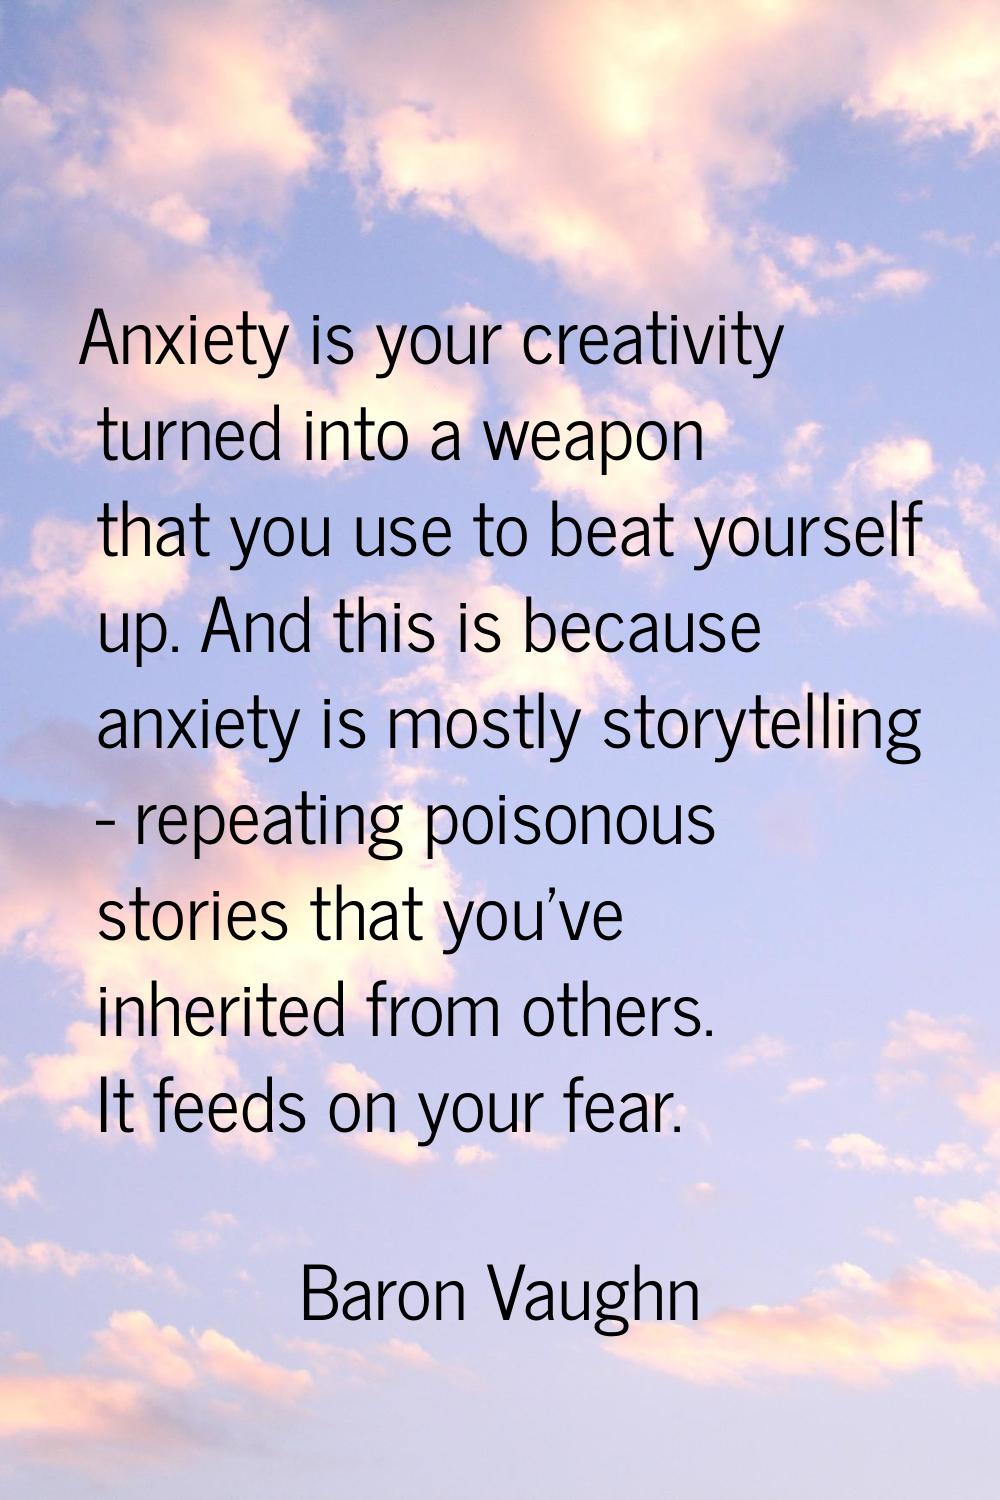 Anxiety is your creativity turned into a weapon that you use to beat yourself up. And this is becau